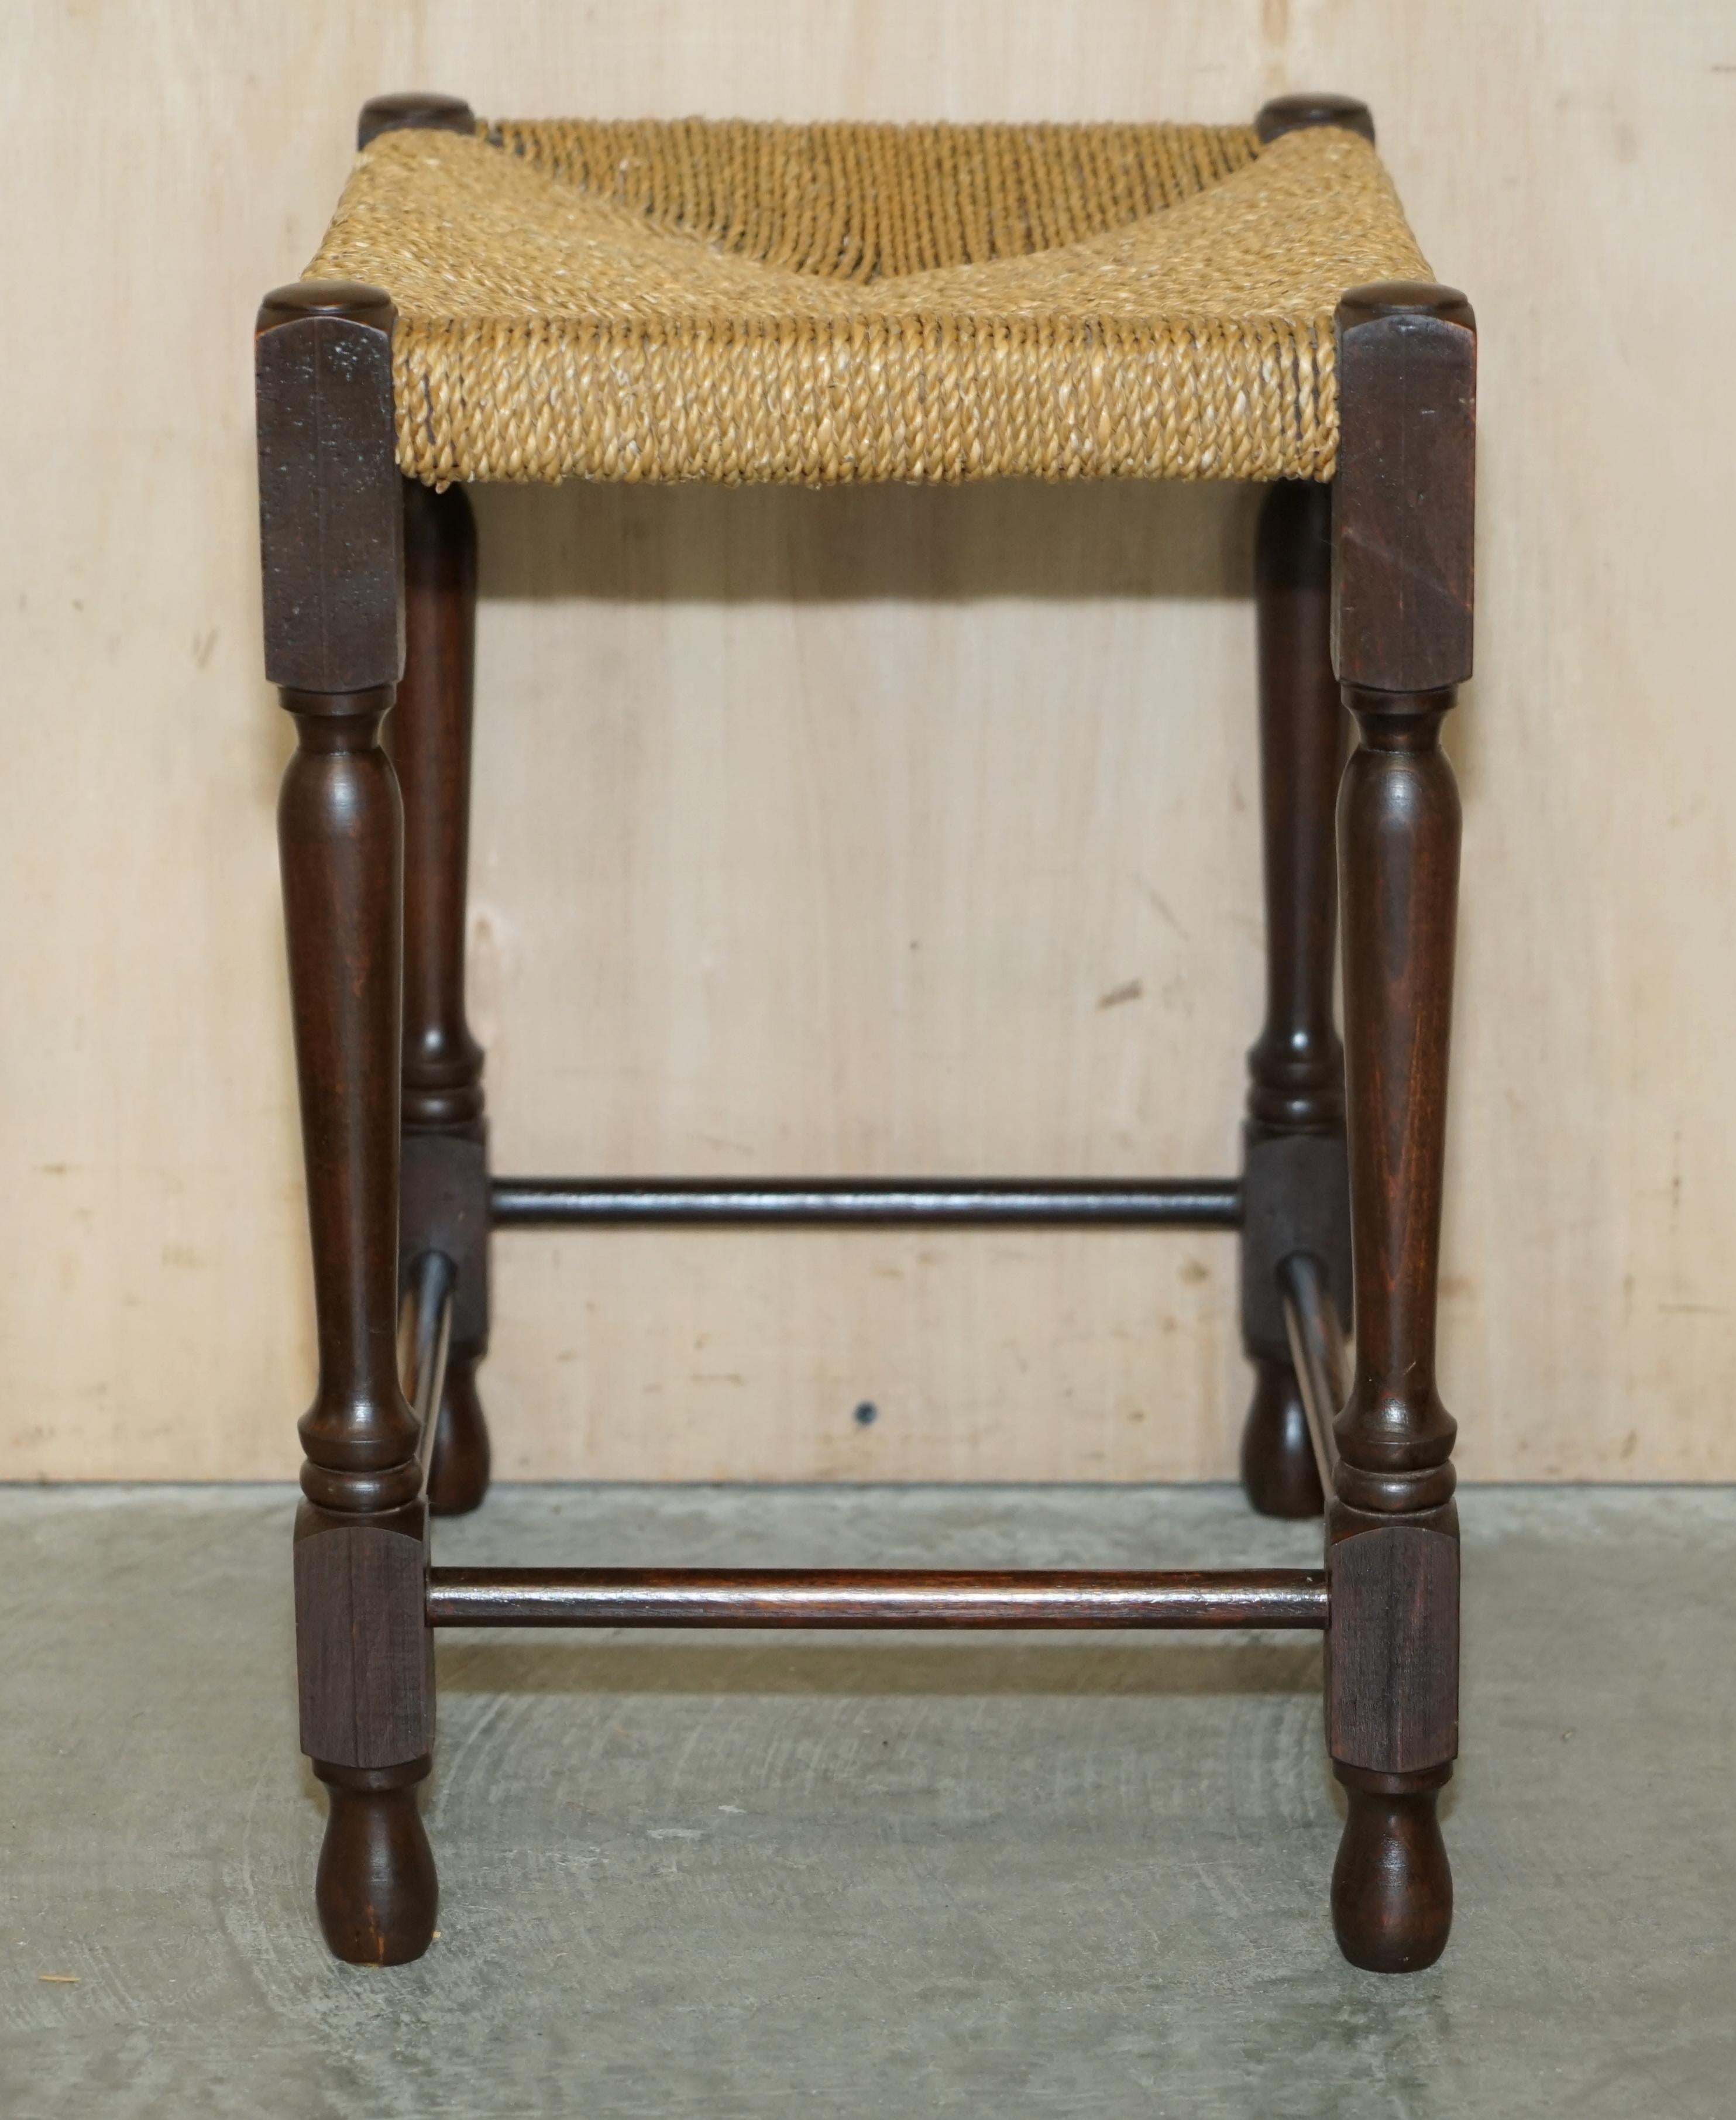 Vintage circa 1940s Dutch Bench Stool with Rope Woven Rush Style Seat For Sale 8